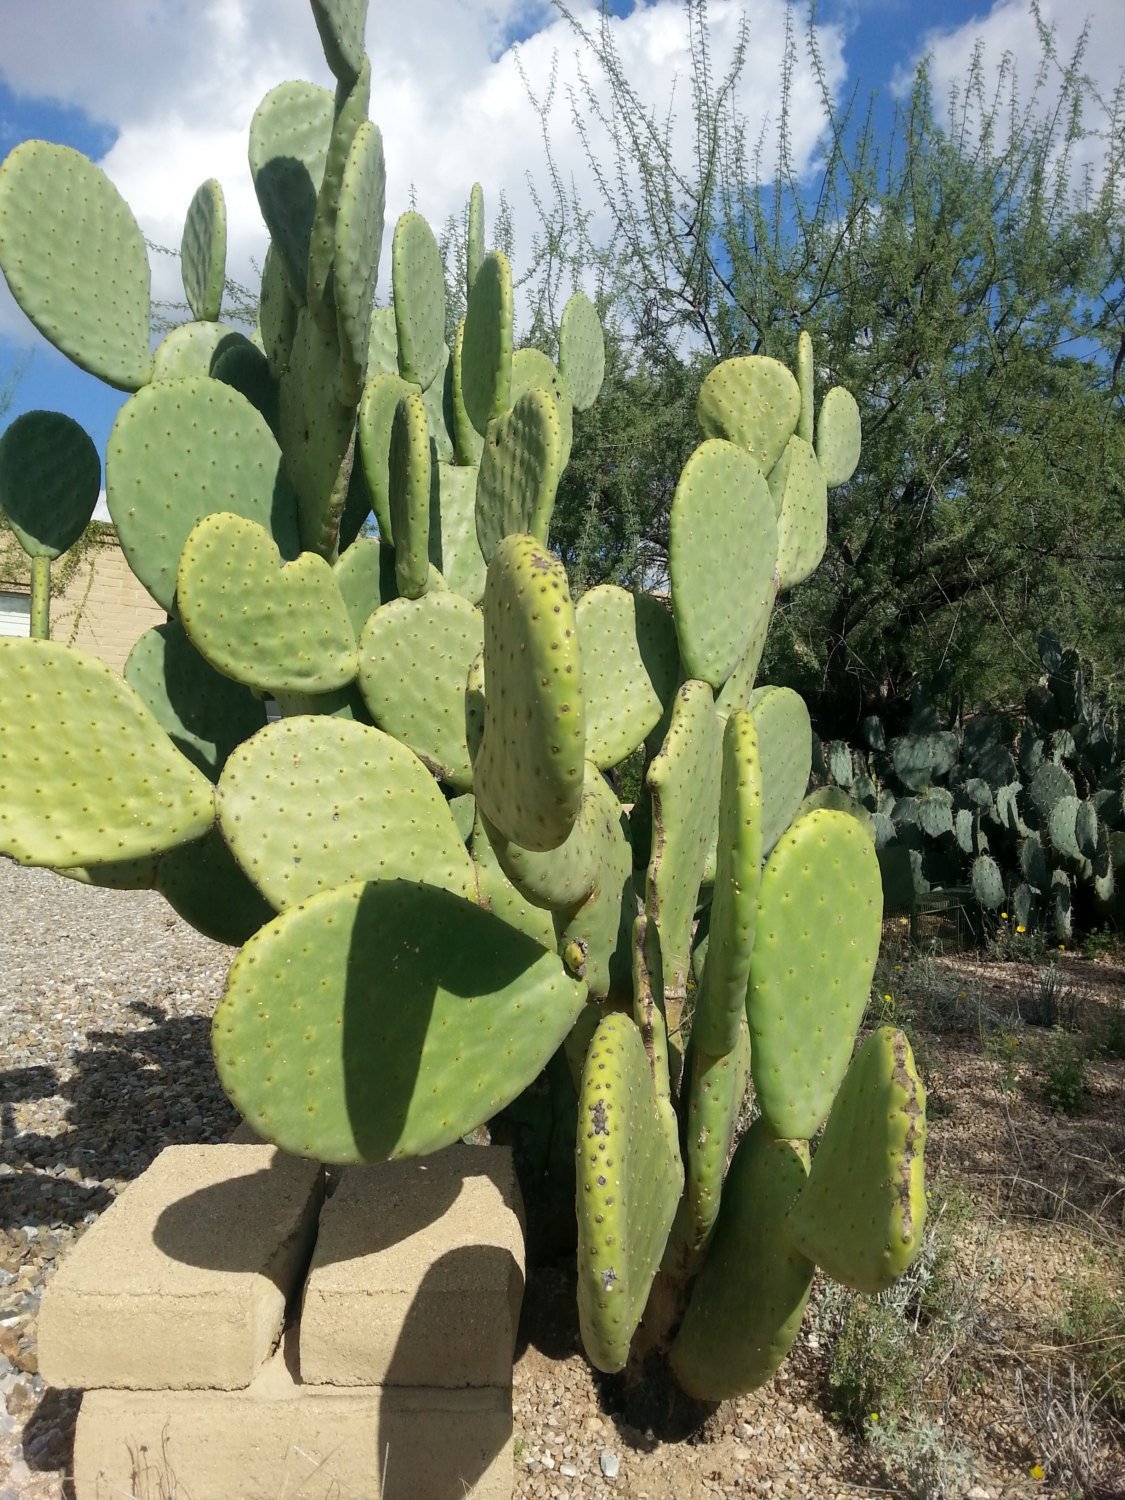 Prickly Pear Cactus Pads for Sale | Looking Sharp Cactus